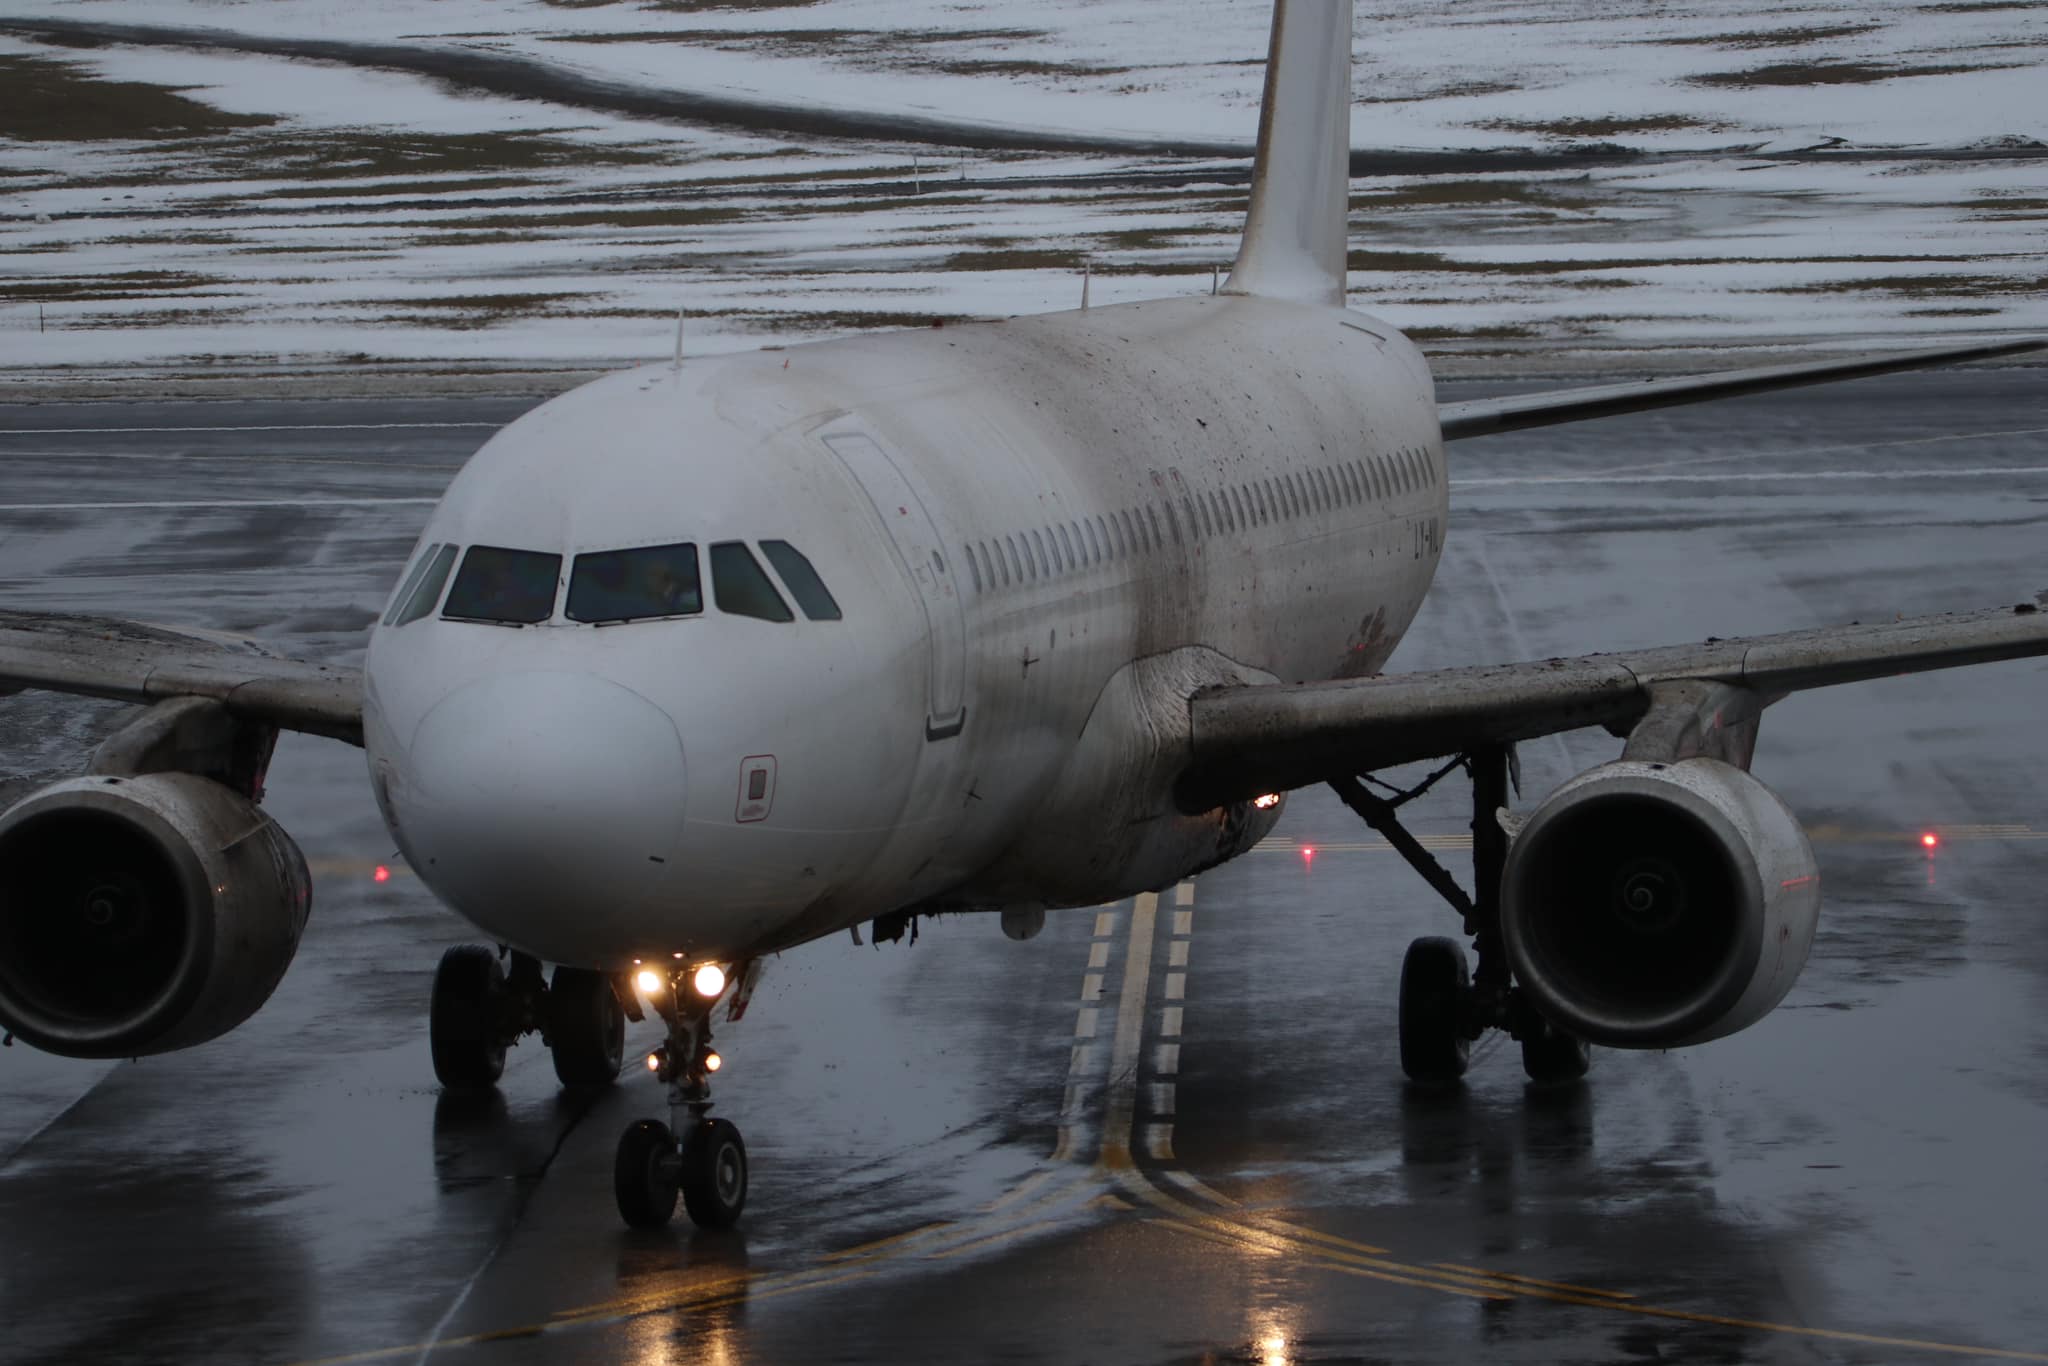 Auto Recovery Of  An  Avion Express Plane That  Skidded  Off  The  Runway  At  The Vilnius airport.